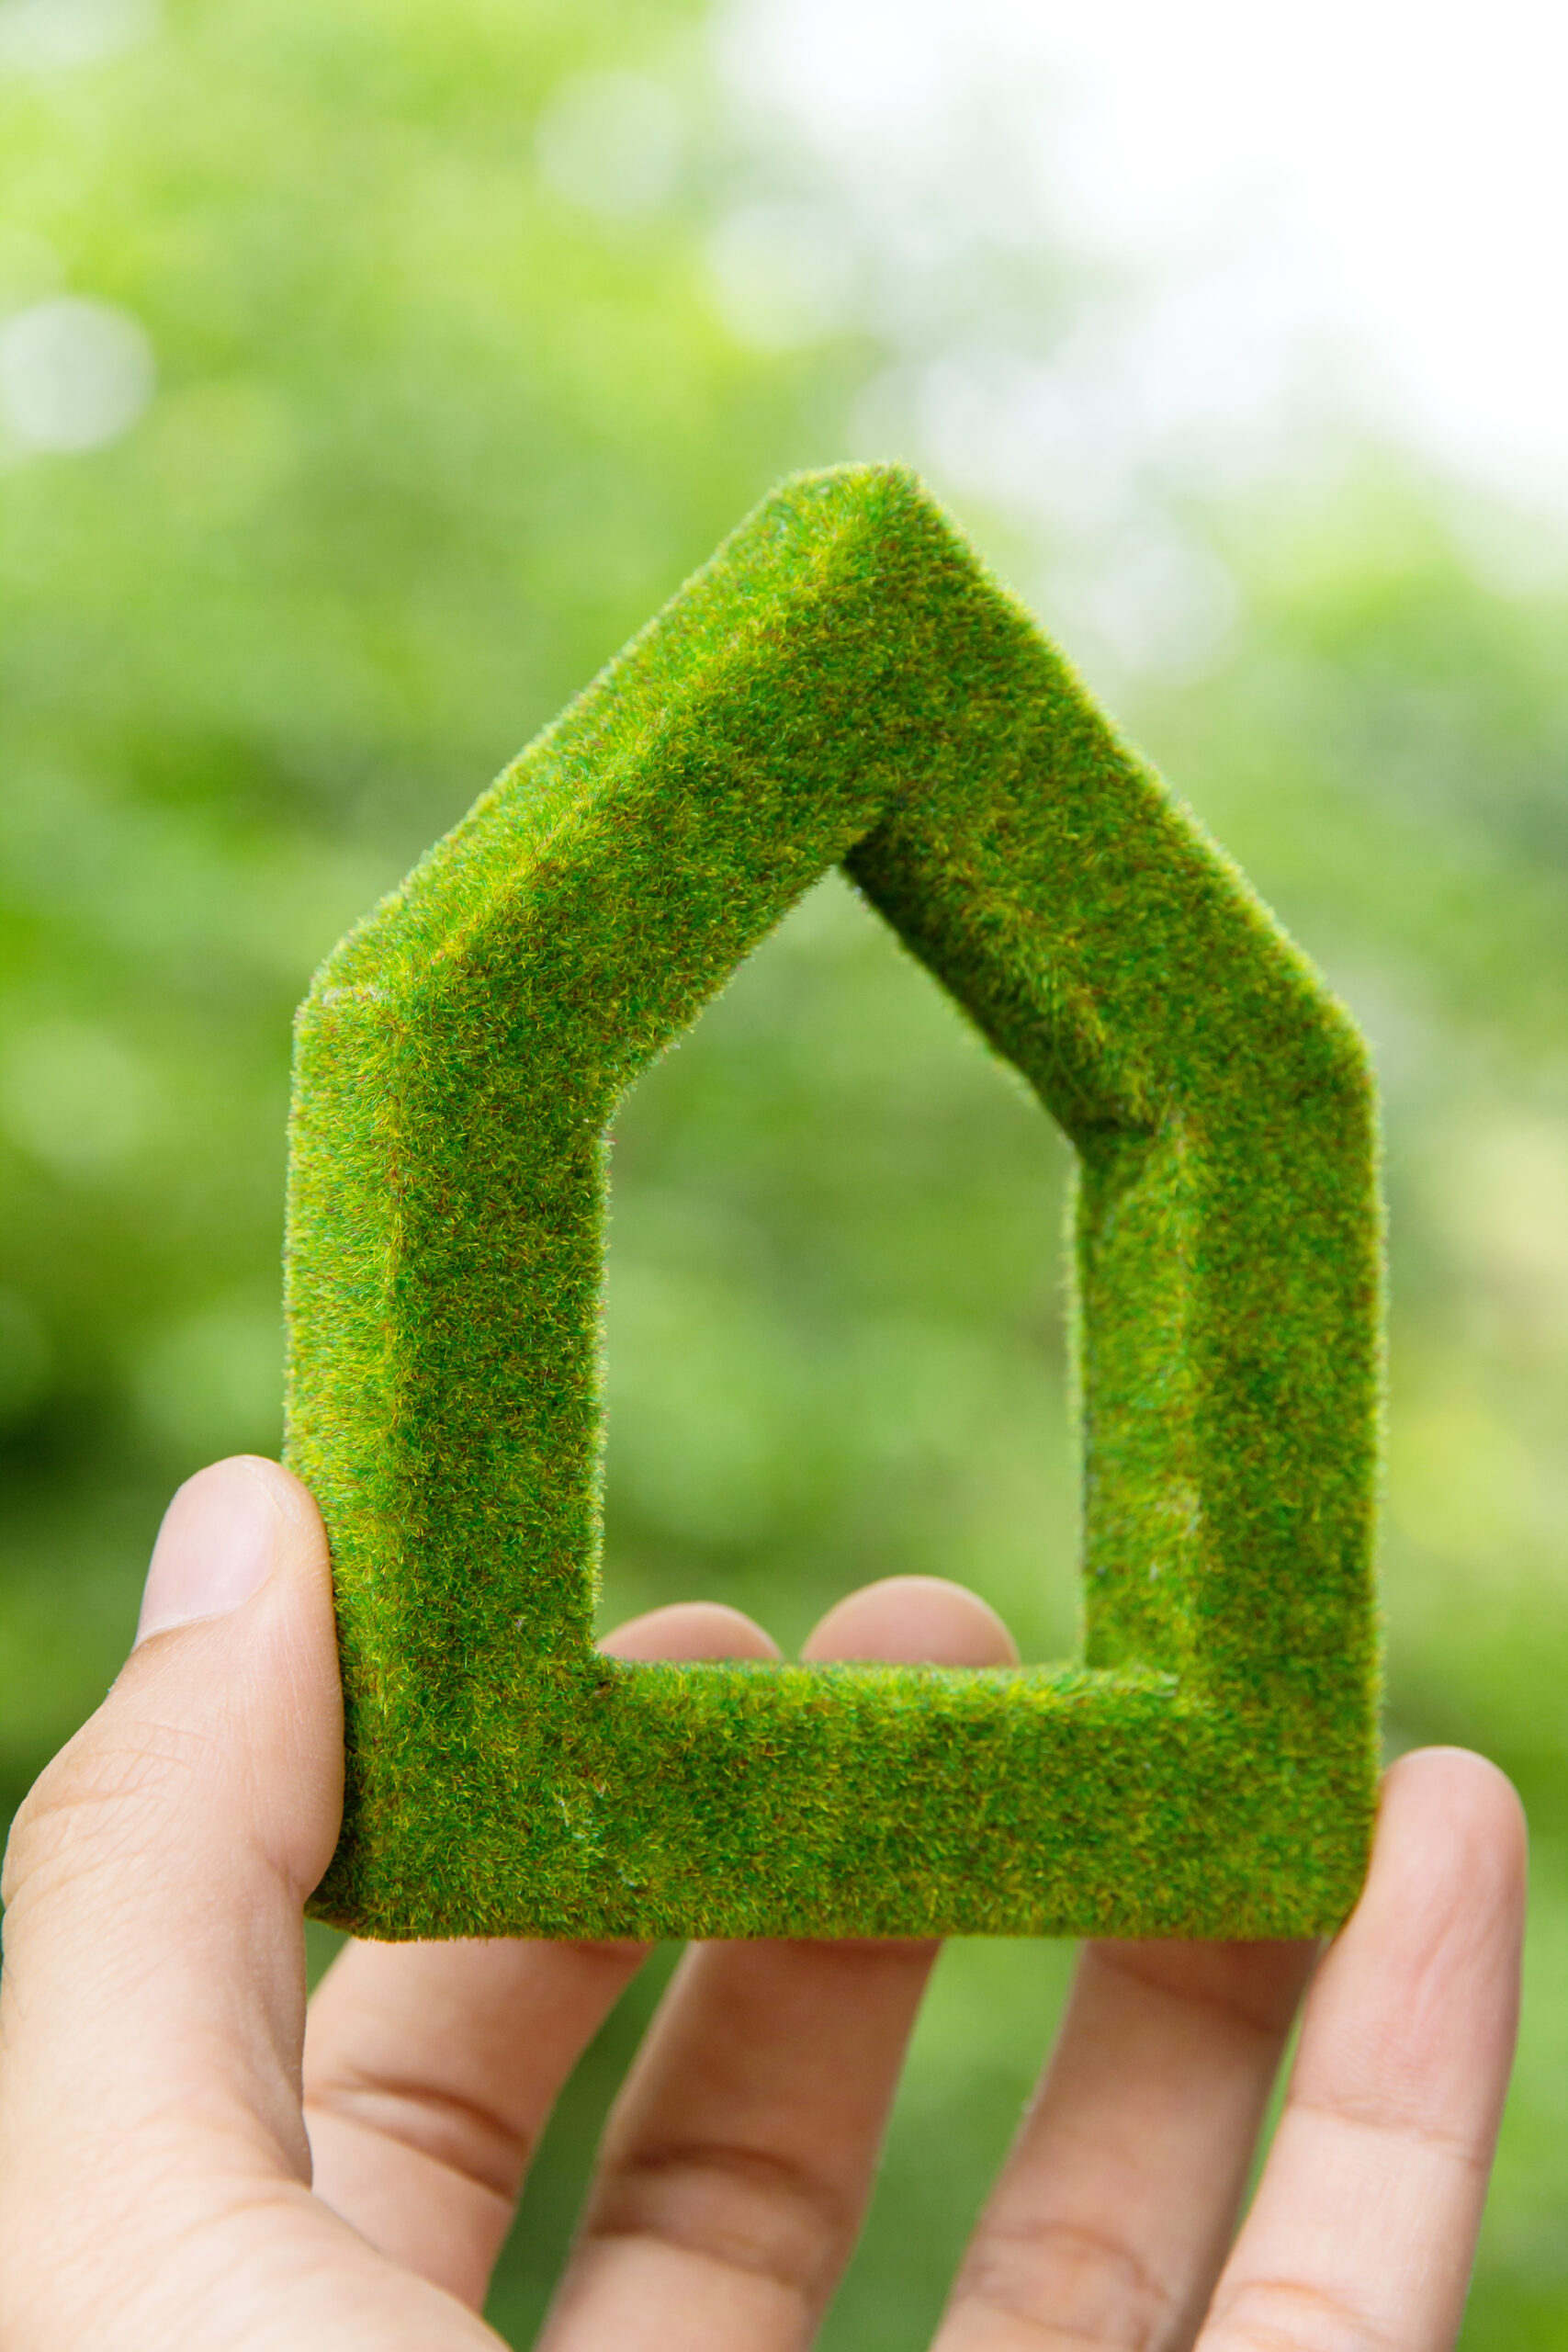 https://zenithbali.com/wp-content/uploads/2024/05/cropped-image-person-holding-green-house-shape-scaled.jpg